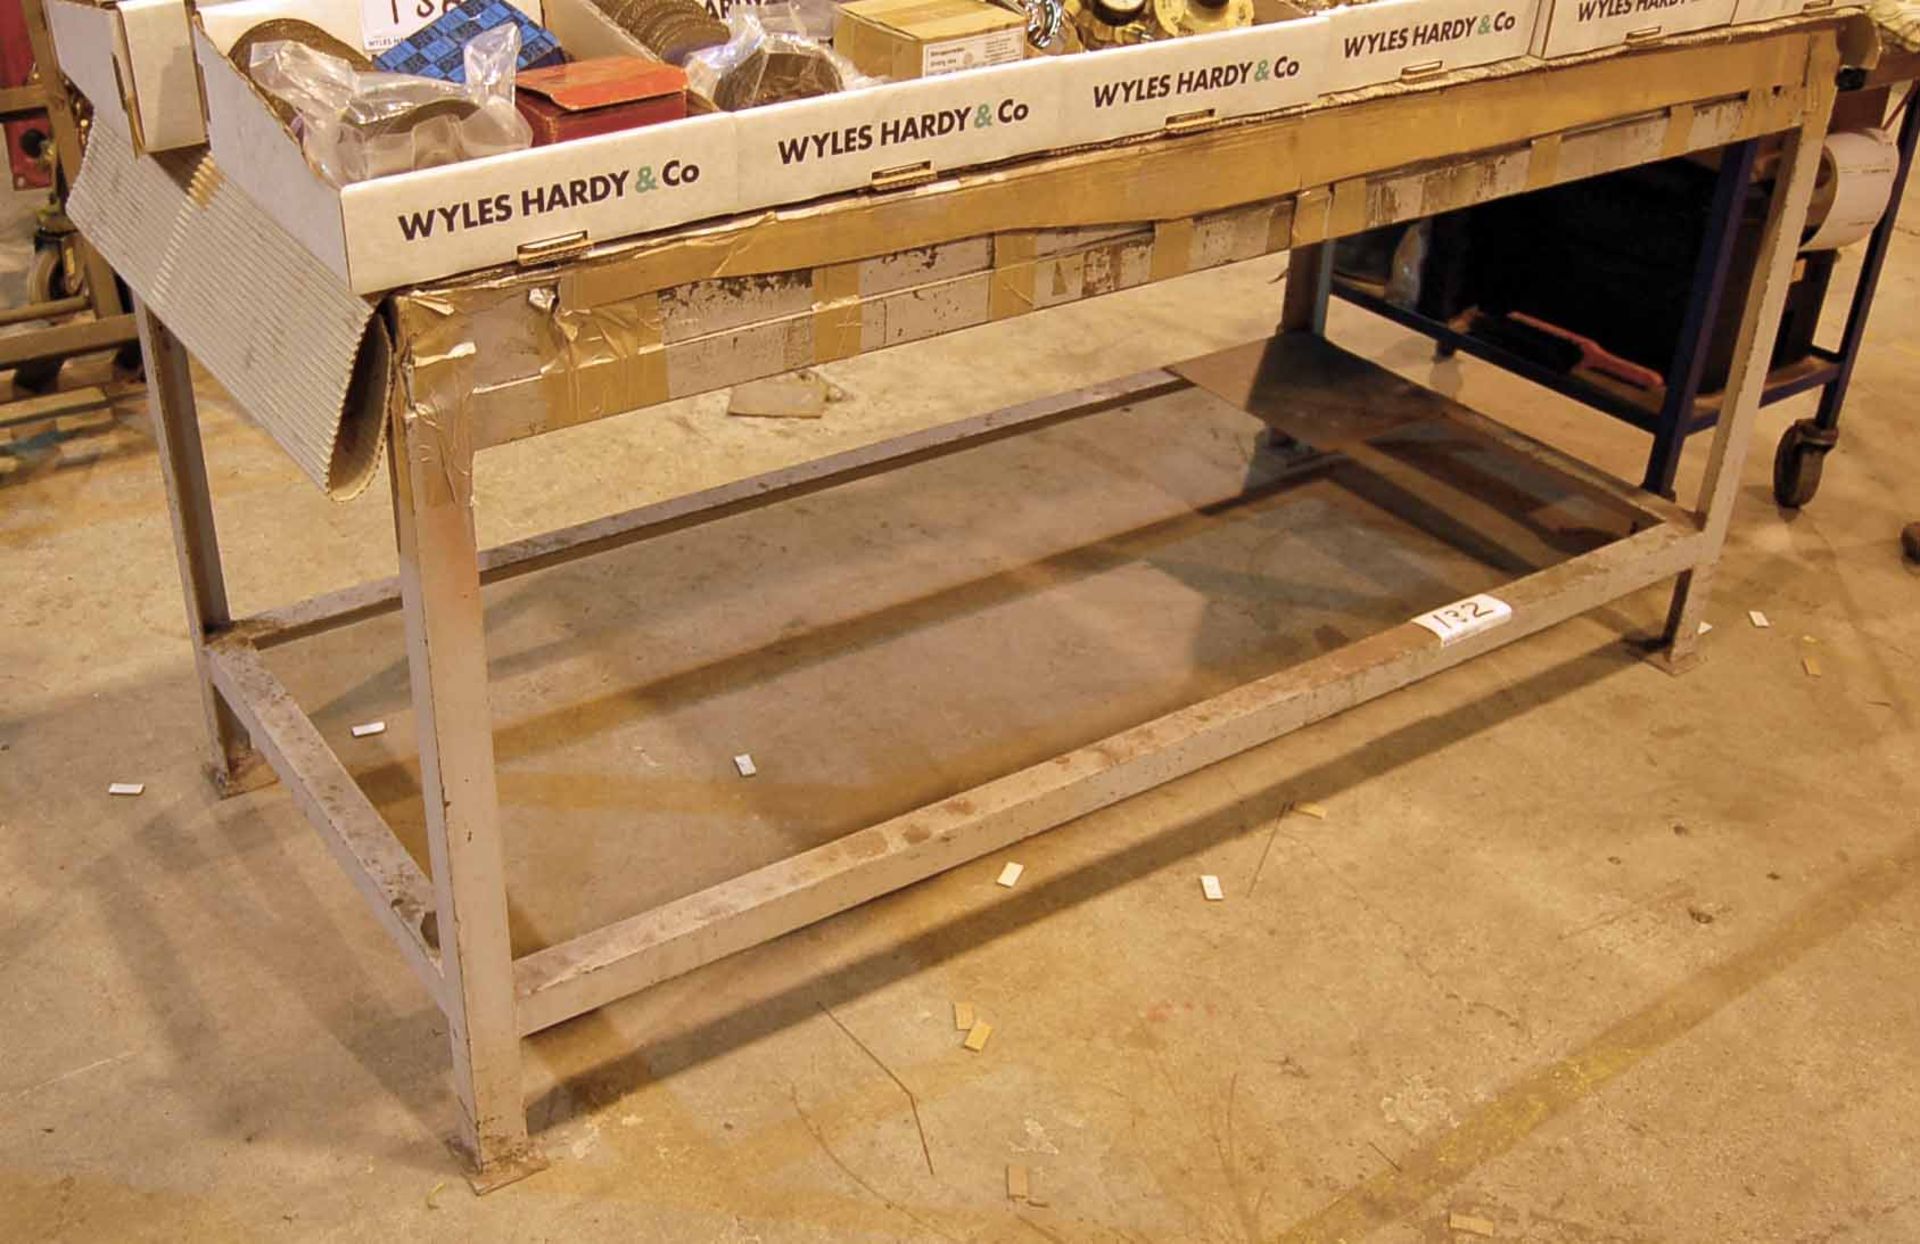 Three Welded Steel Workbenches with One Record No 25 Engineers Vice - Image 3 of 3